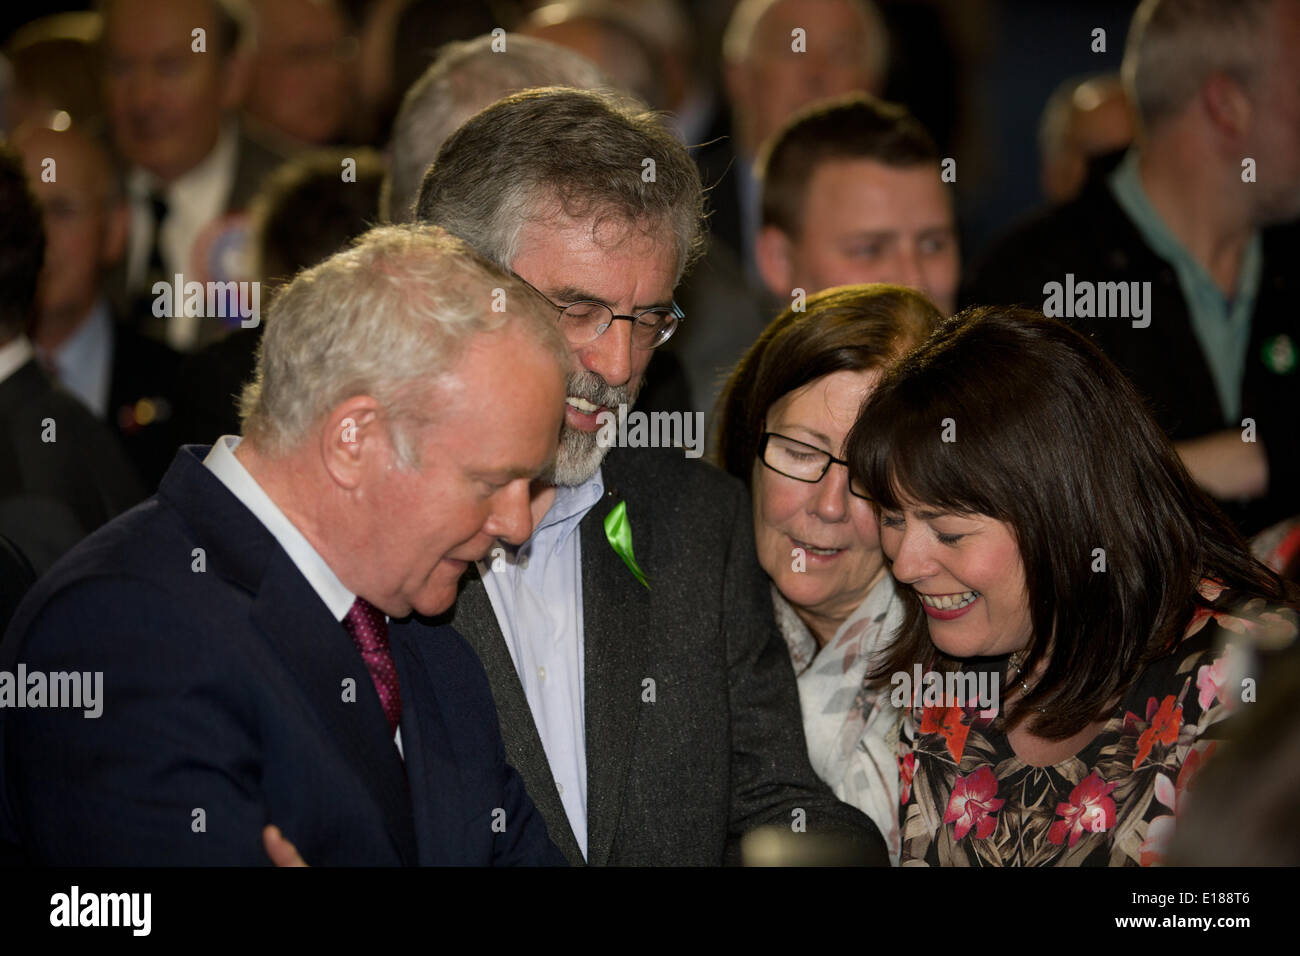 Belfast, UK. 26th May, 2014. Gerry Adams TD Texting with Martin McGuinness and Michelle Gildernew at European Election Results in Belfast Credit:  Bonzo/Alamy Live News Stock Photo